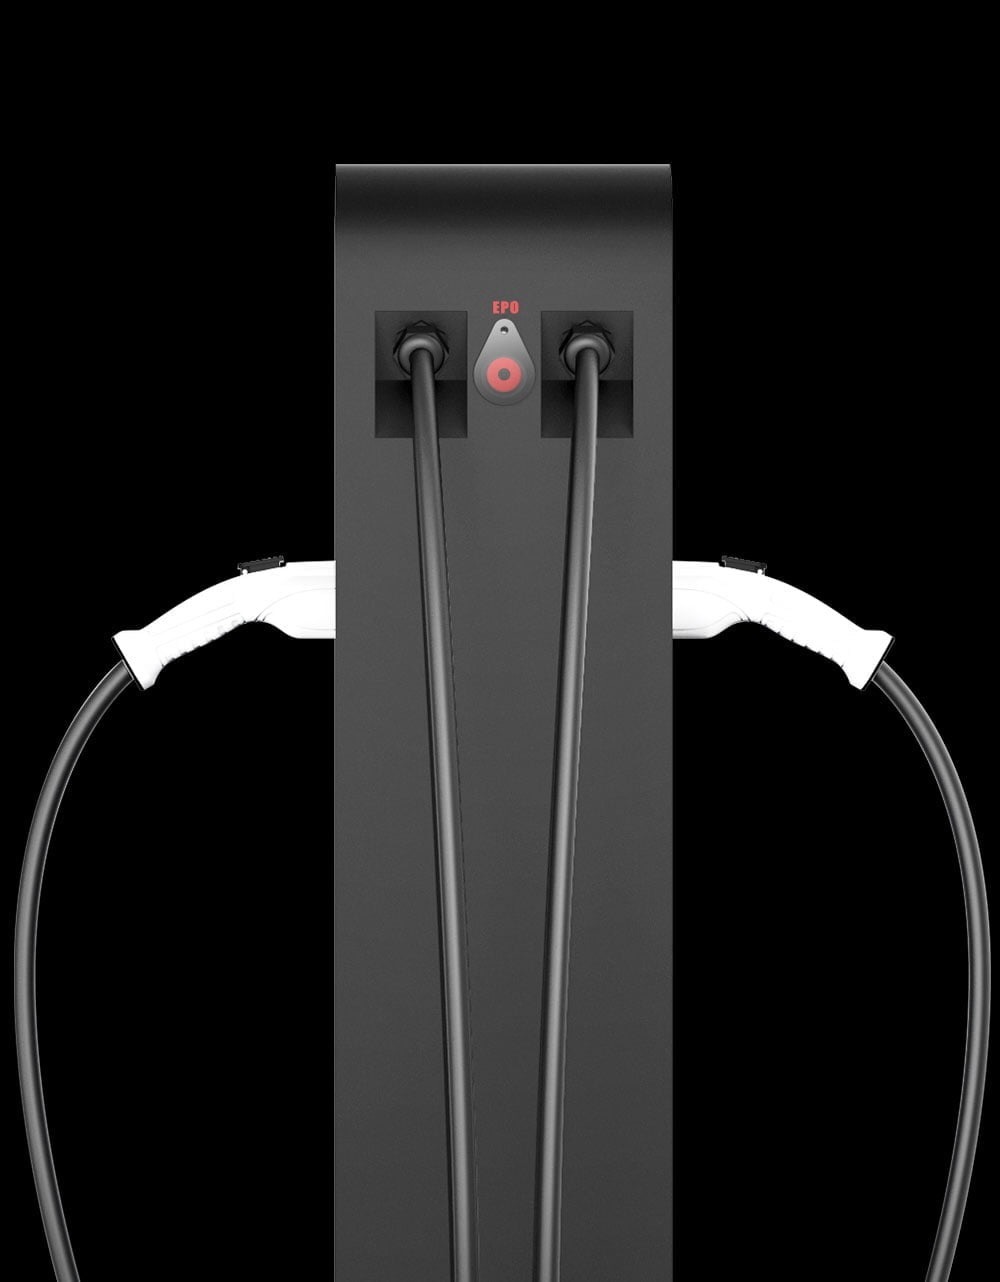 QiOn' Stylo up 44 kw with a double cable configuration seen from the left hand side